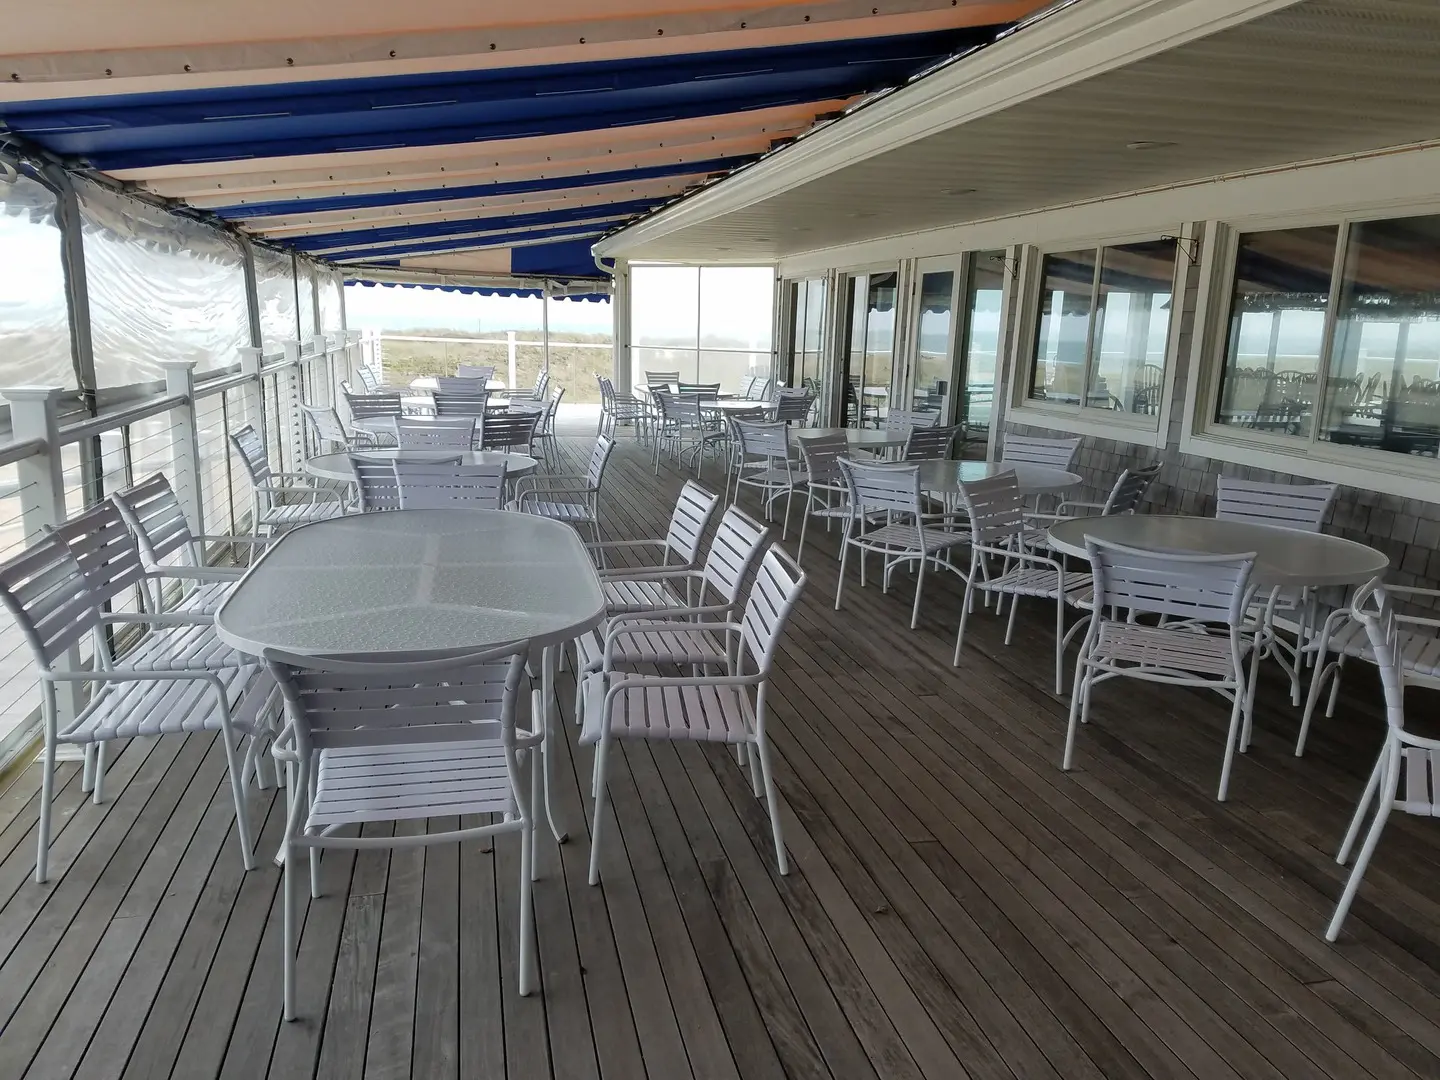 A large wooden deck with tables and chairs.